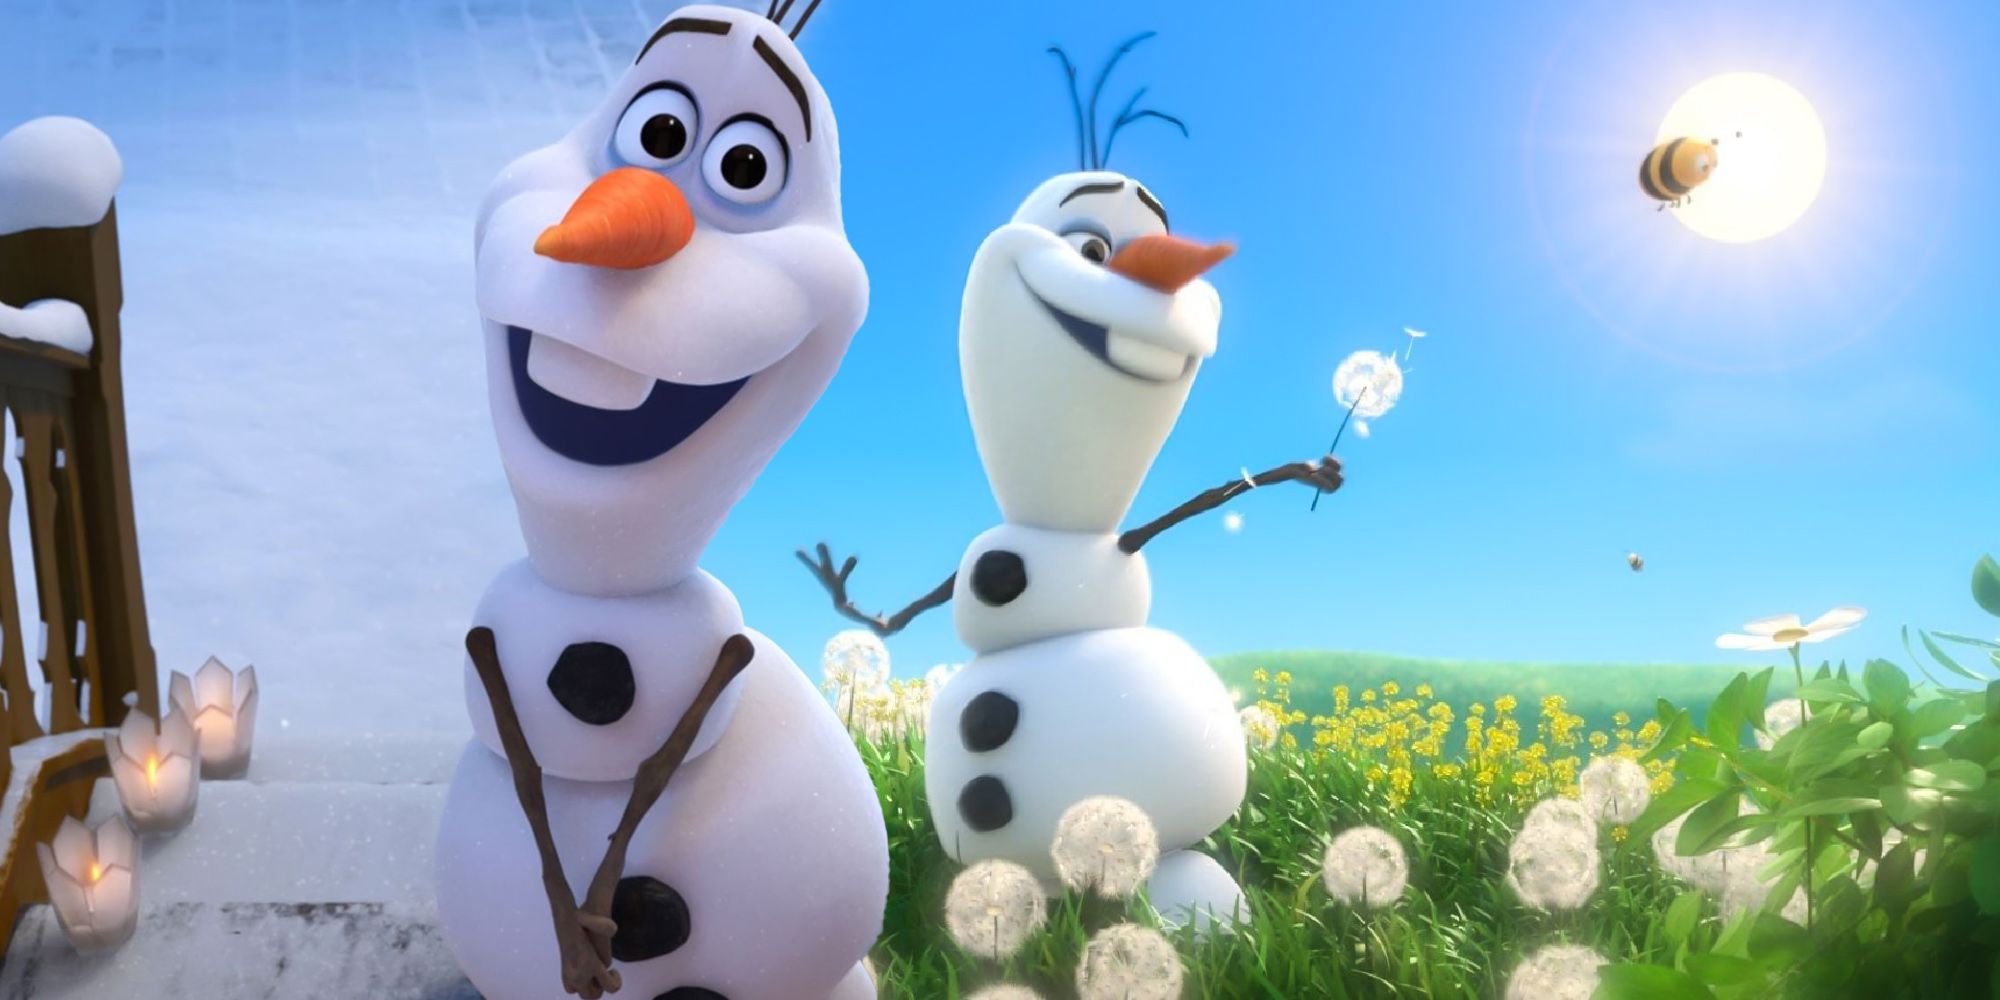 Frozen should focus more on lore and less on Olaf. 